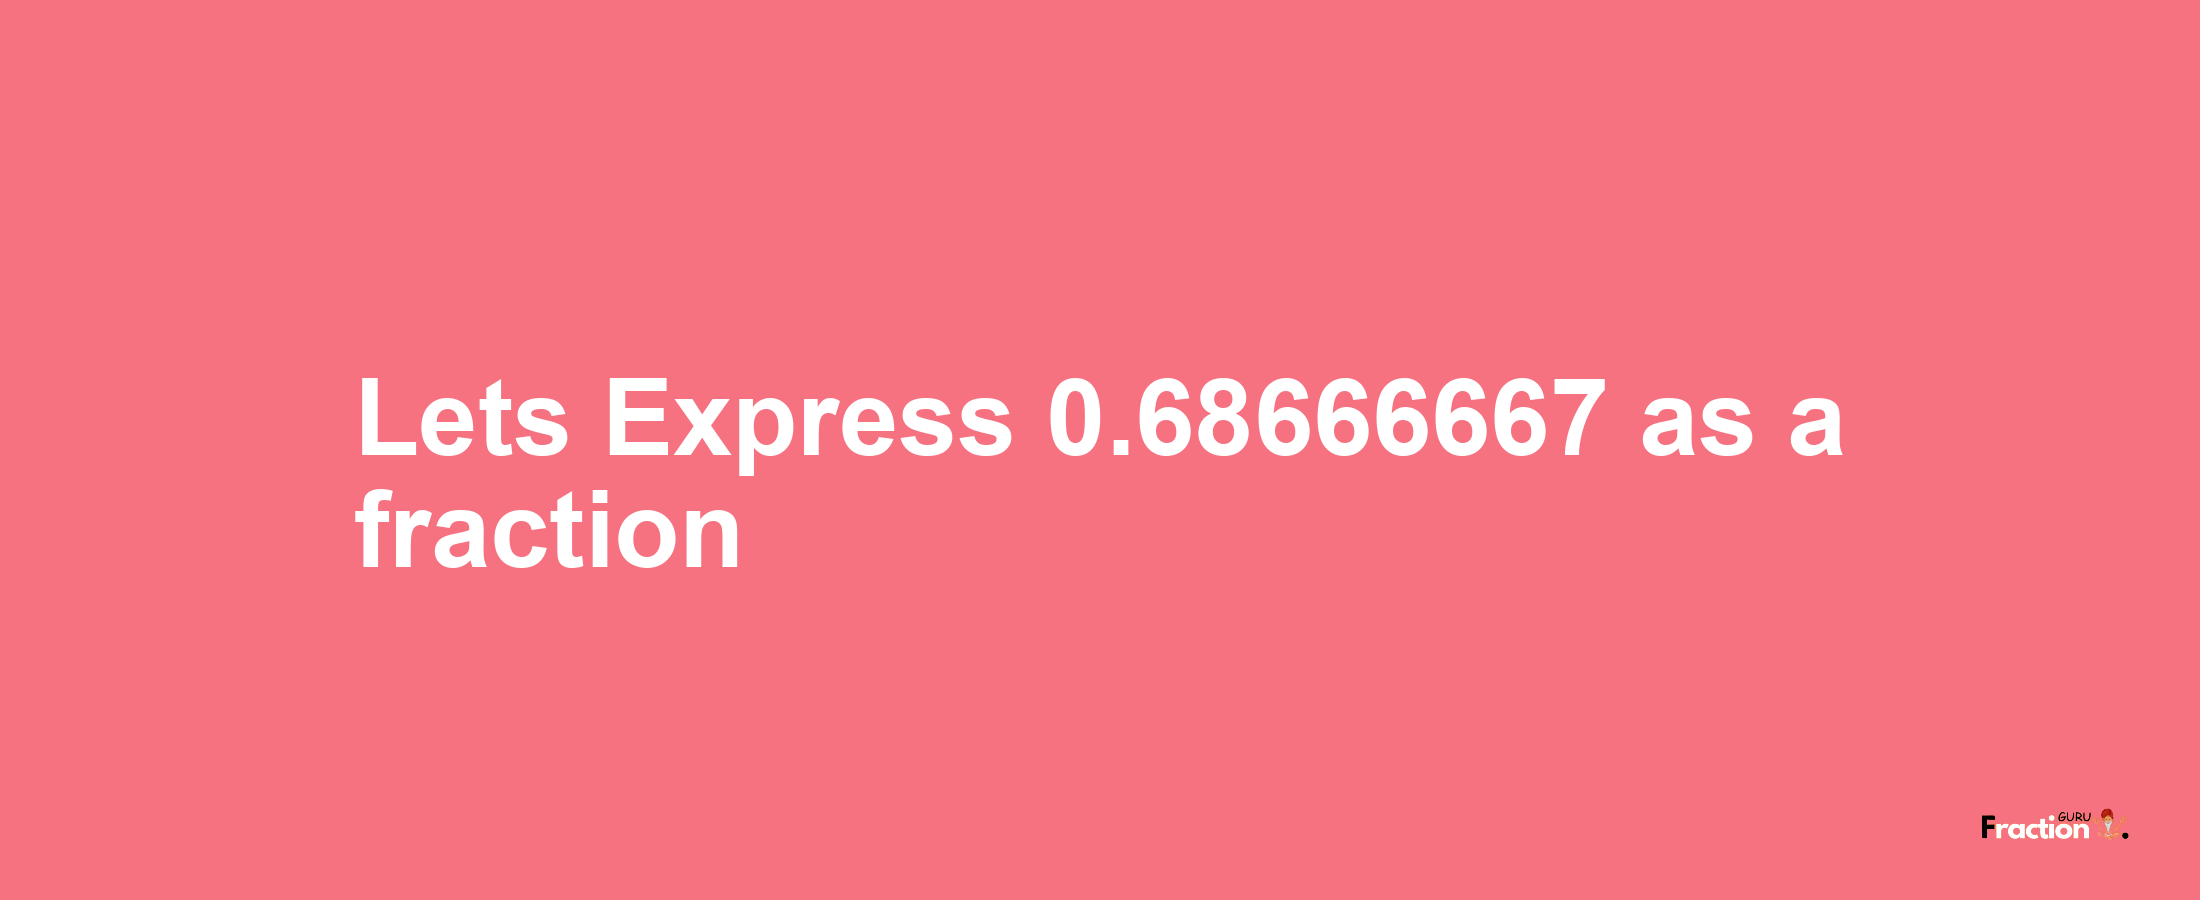 Lets Express 0.68666667 as afraction